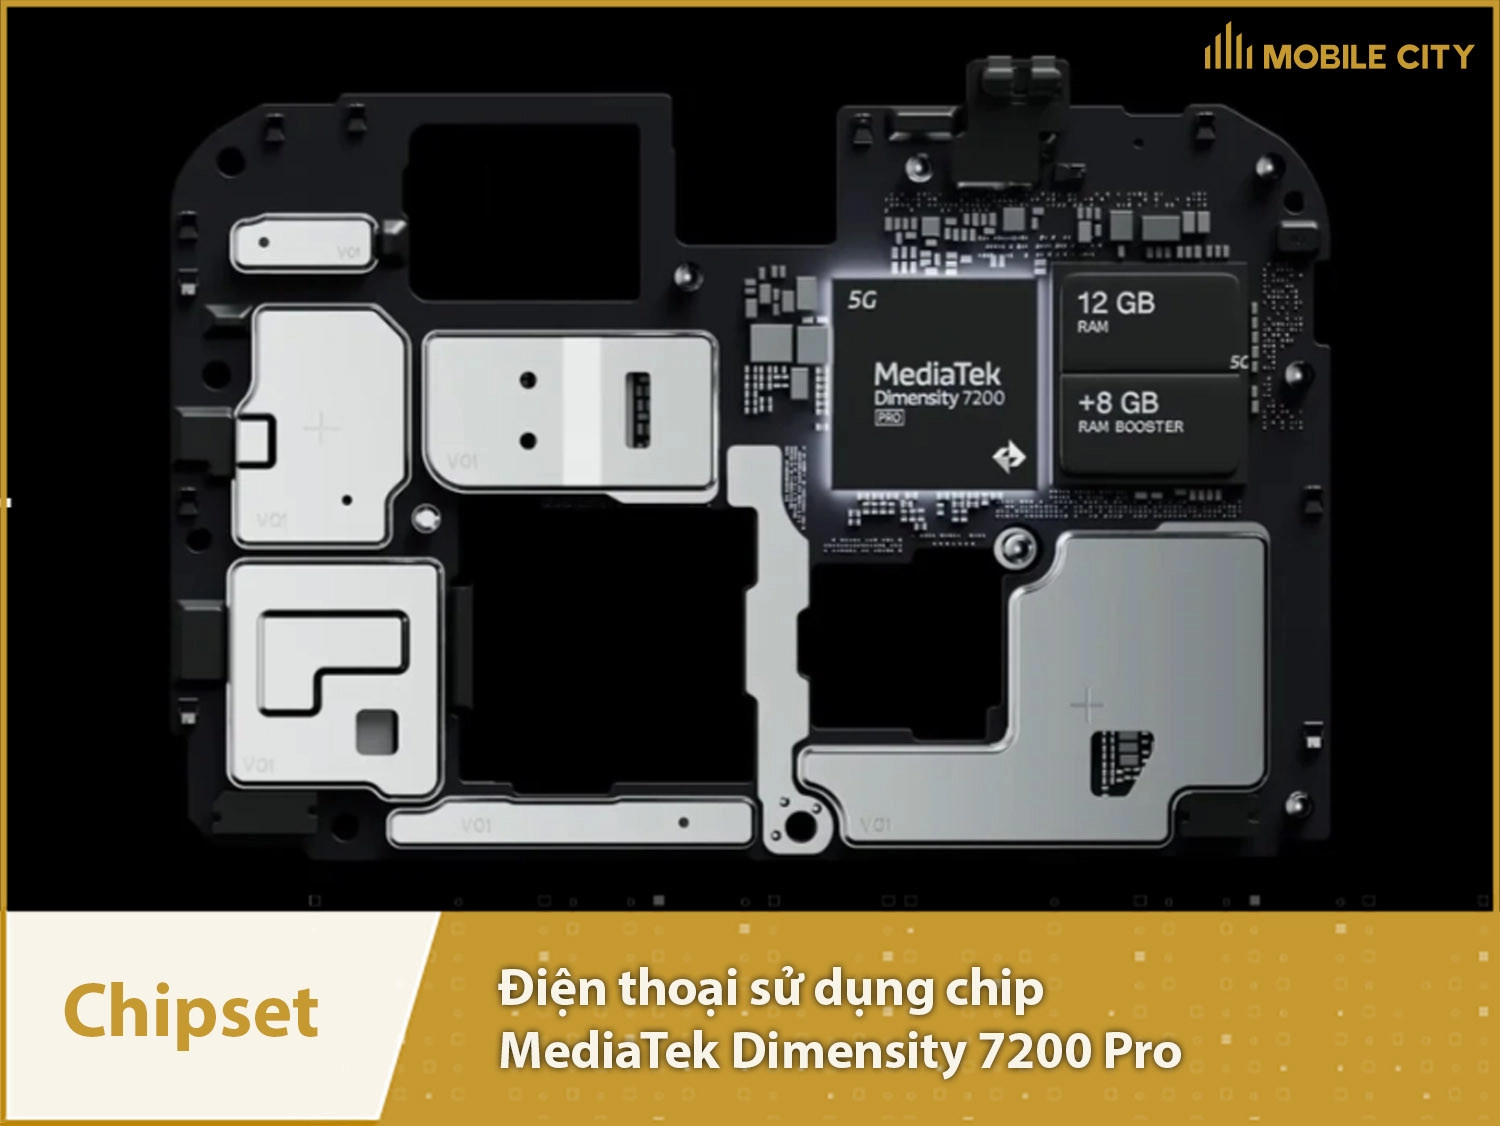 Nothing Phone (2a) sử dụng chip Dimensity 7200 Pro